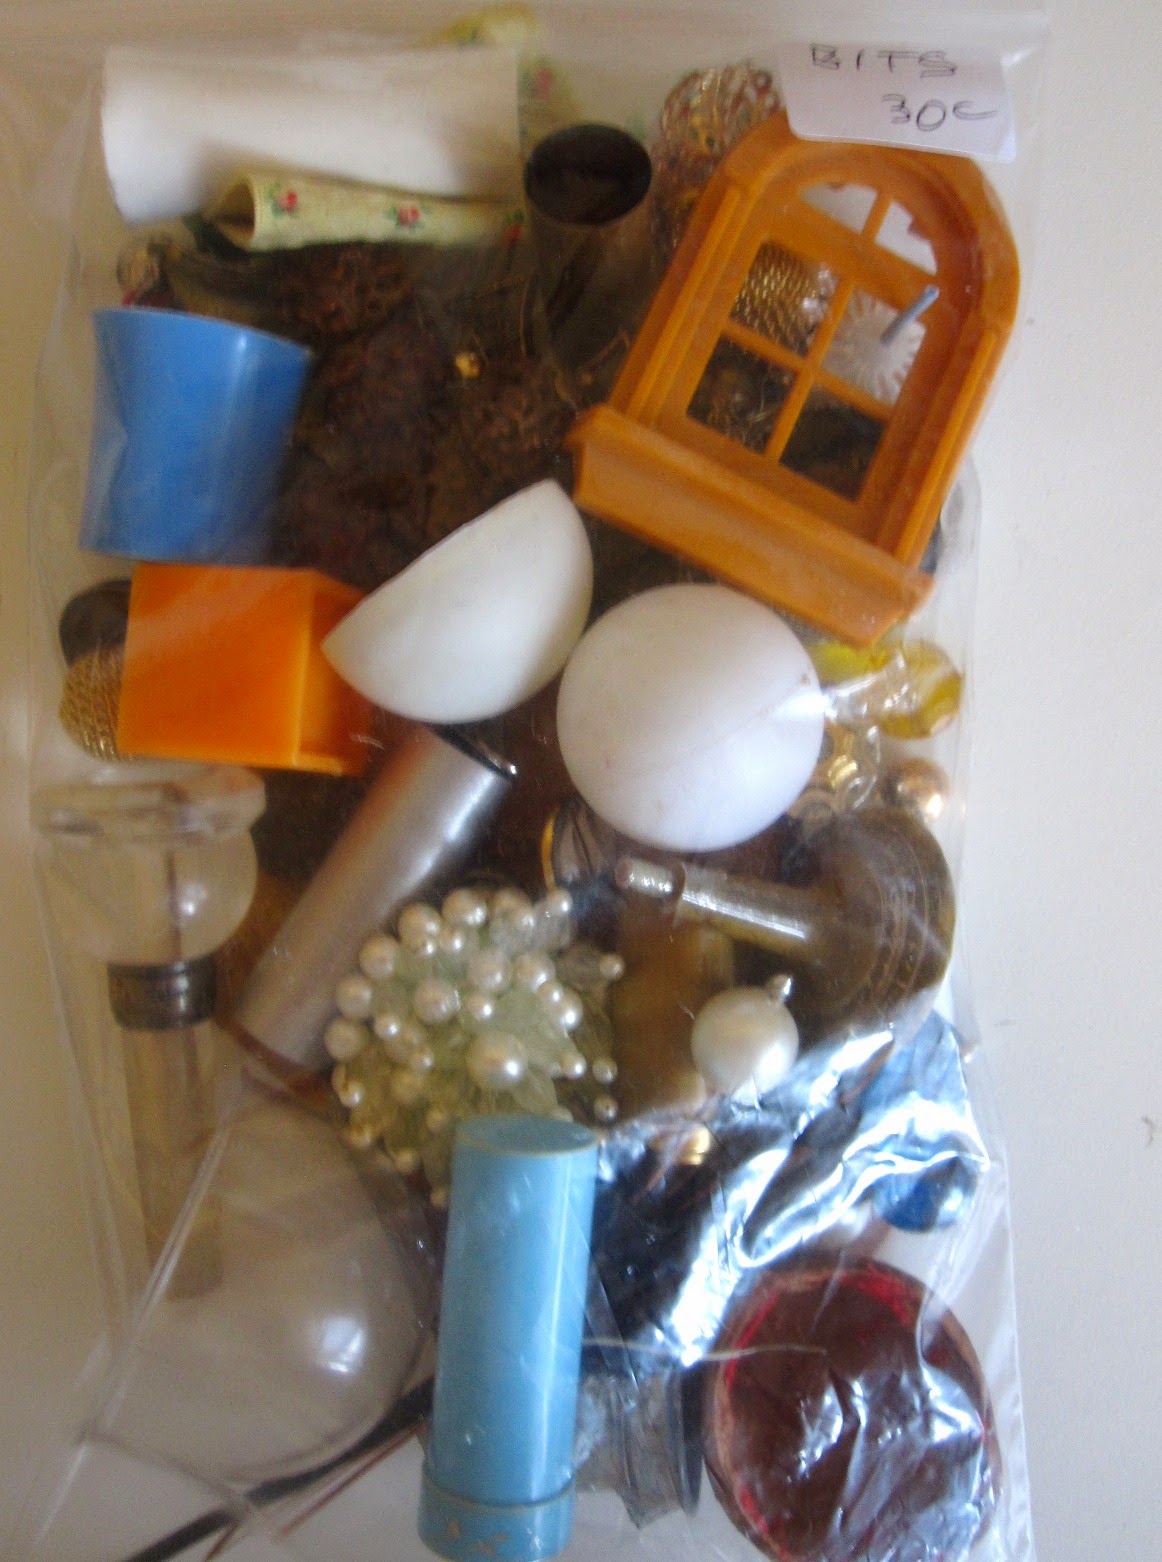 A5-sized bag of bits and bobs for miniature use. Bag is marked 'Bits 30c' and contains a variety of vintage earrings, containers and jewellery pieces.